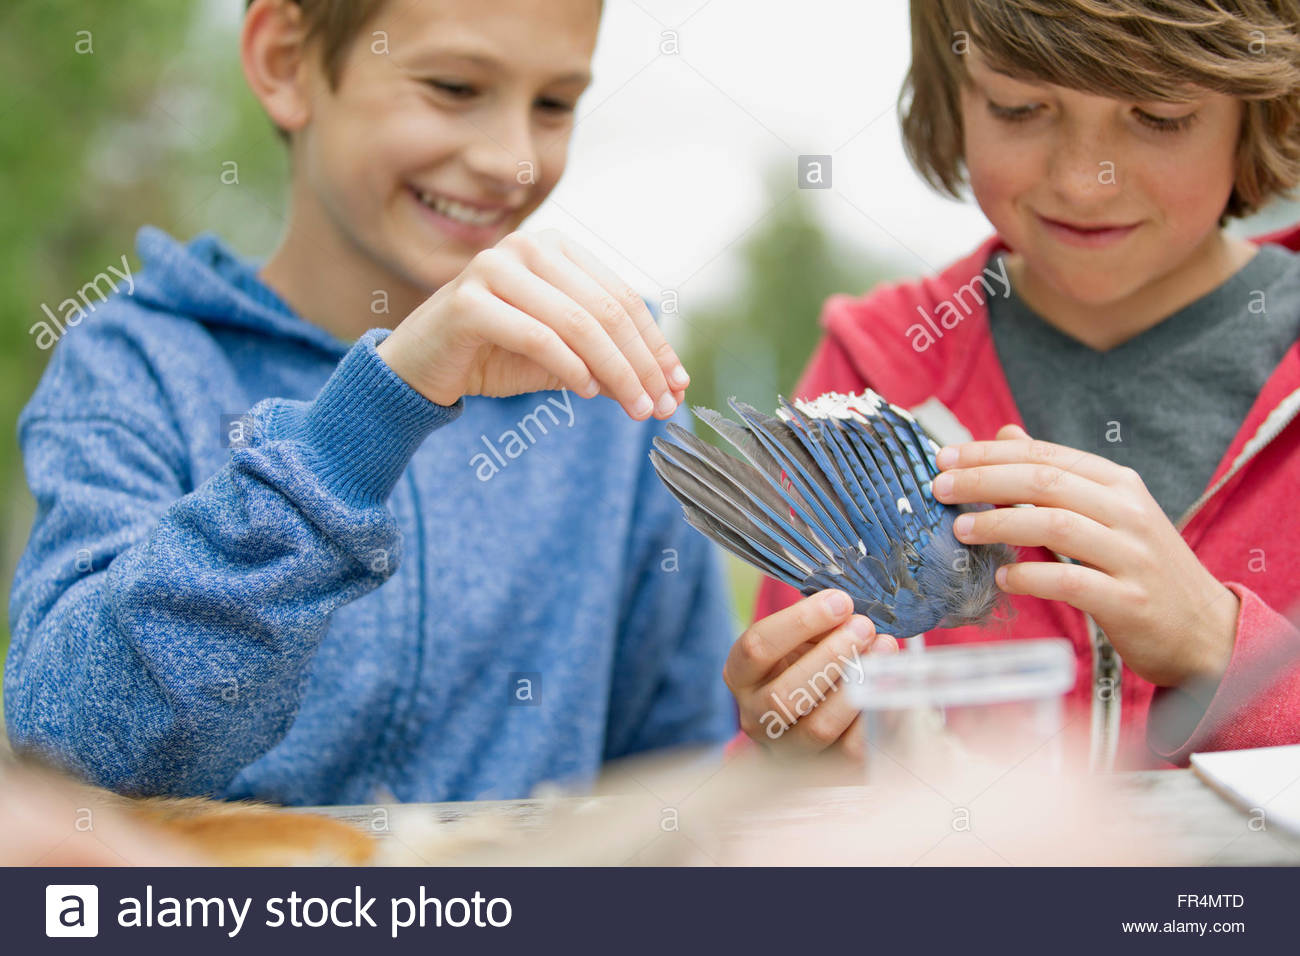 middle school students touching bird wing Stock Photo